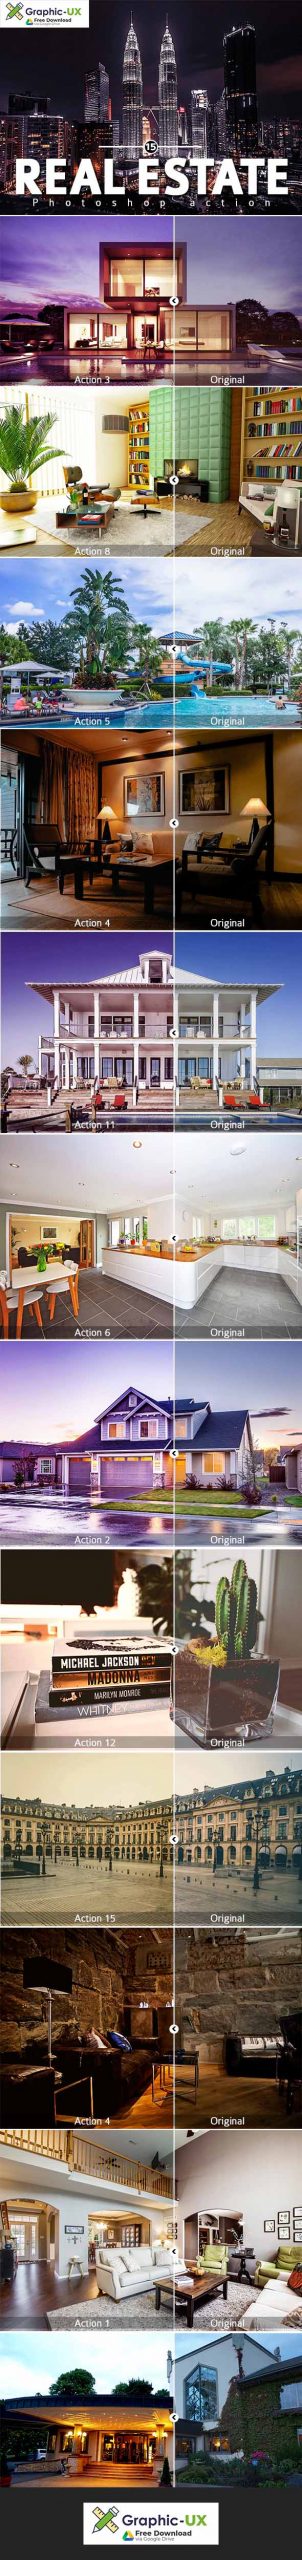 15 Real Estate Photoshop action